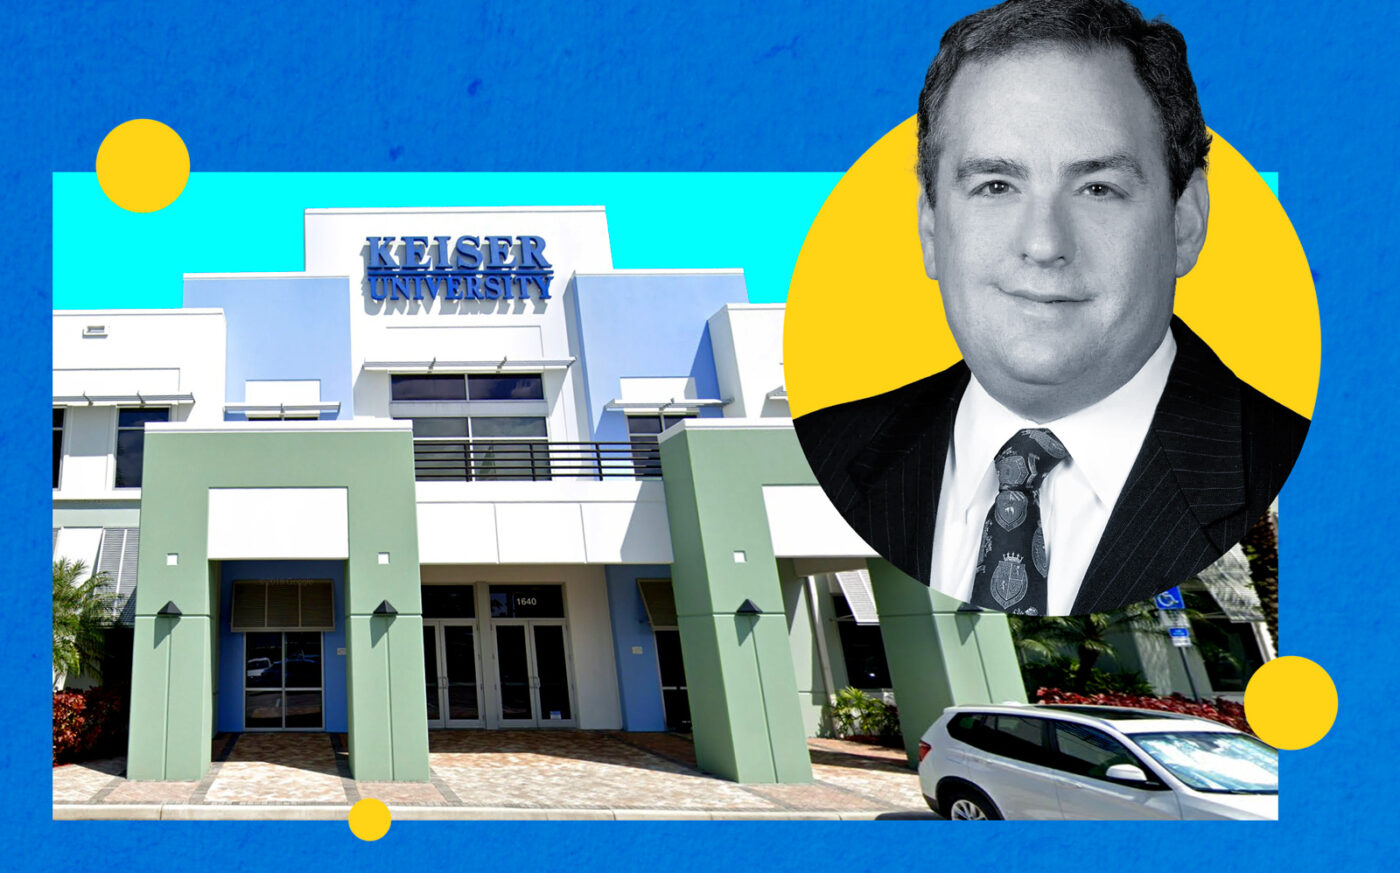 Everglades College's Arthur Keiser and the Keiser University building at 1640 Southwest 145th Avenue in Pembroke Pines